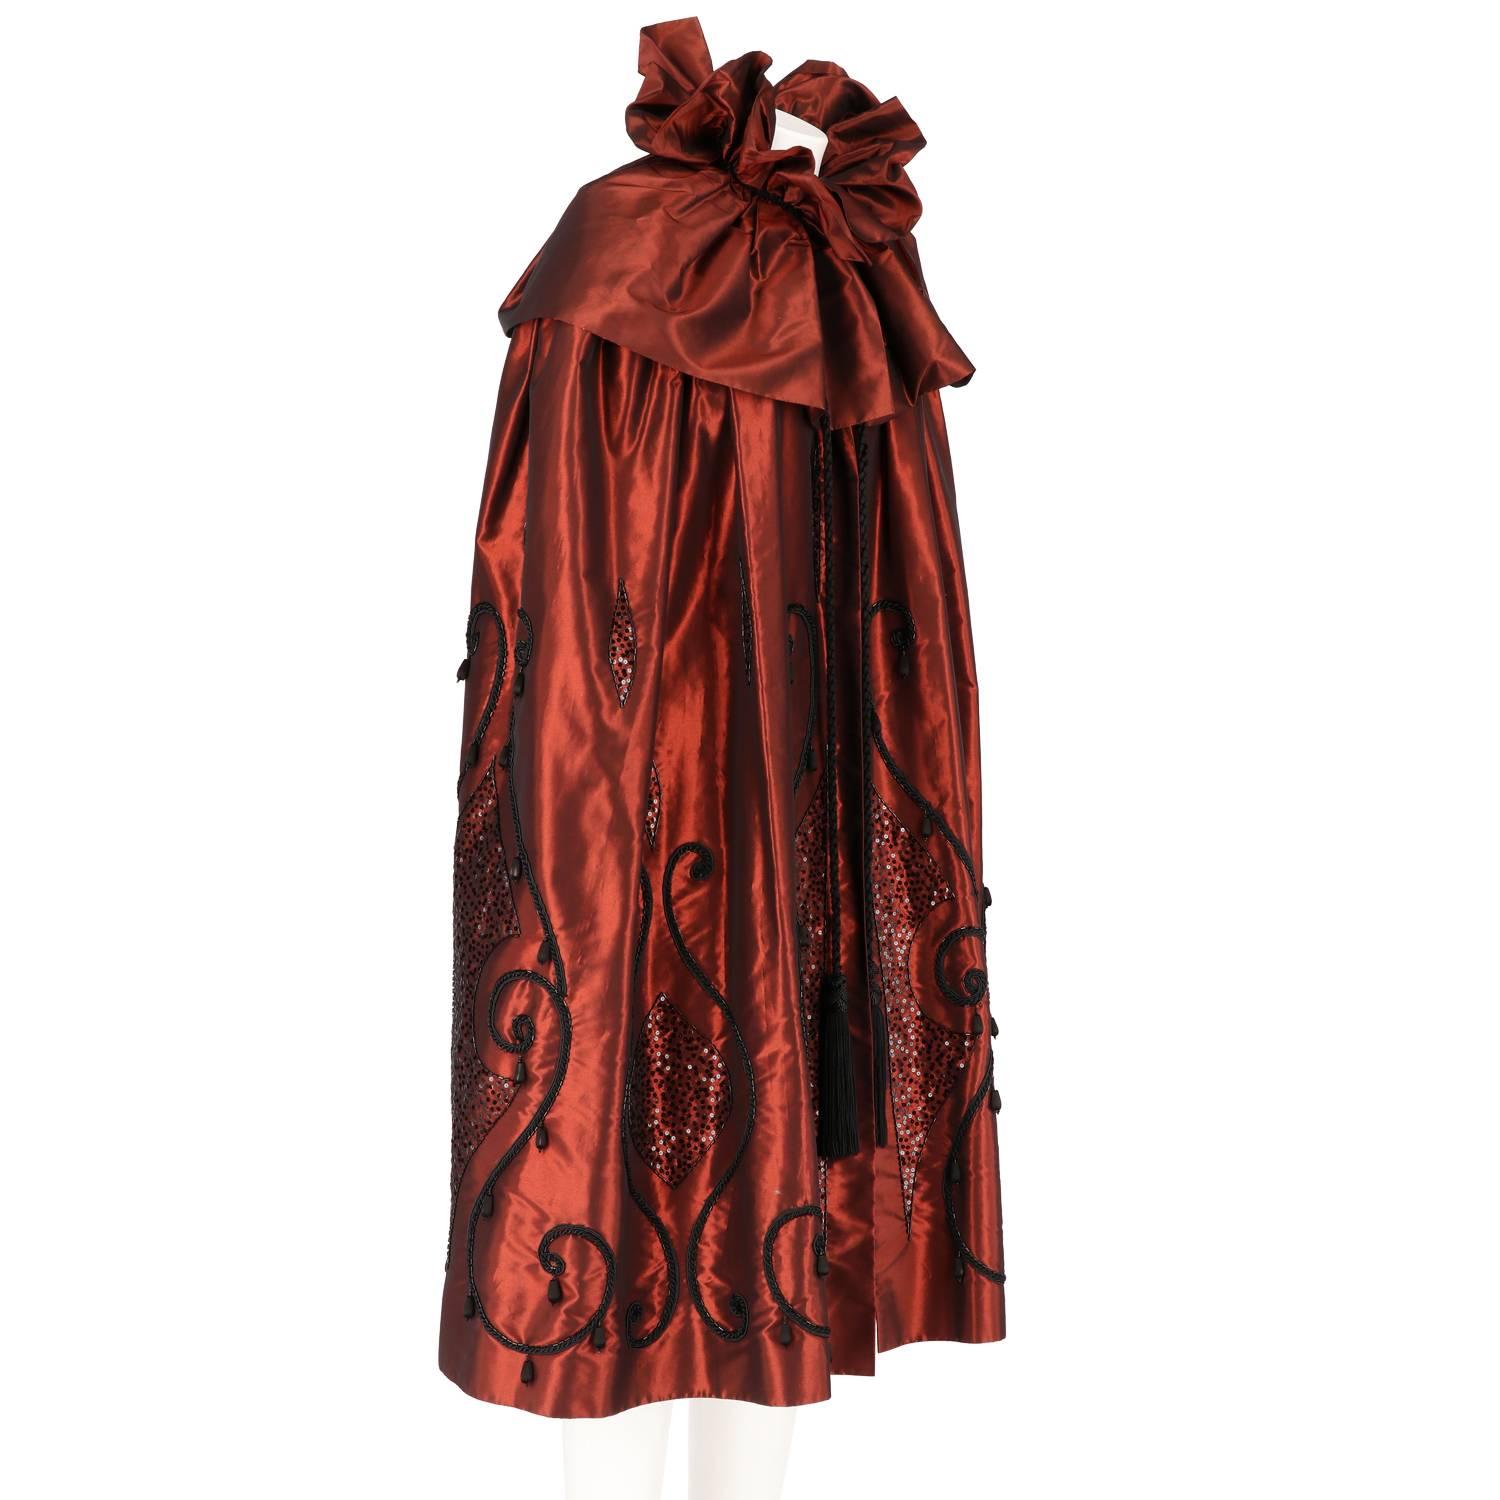 Spectacular Guy Laroche cape from the 1990s. This magnificent piece is made of irridescent copper taffeta. Features inside lining, precious sequined embroidery, beads and cords.

One size